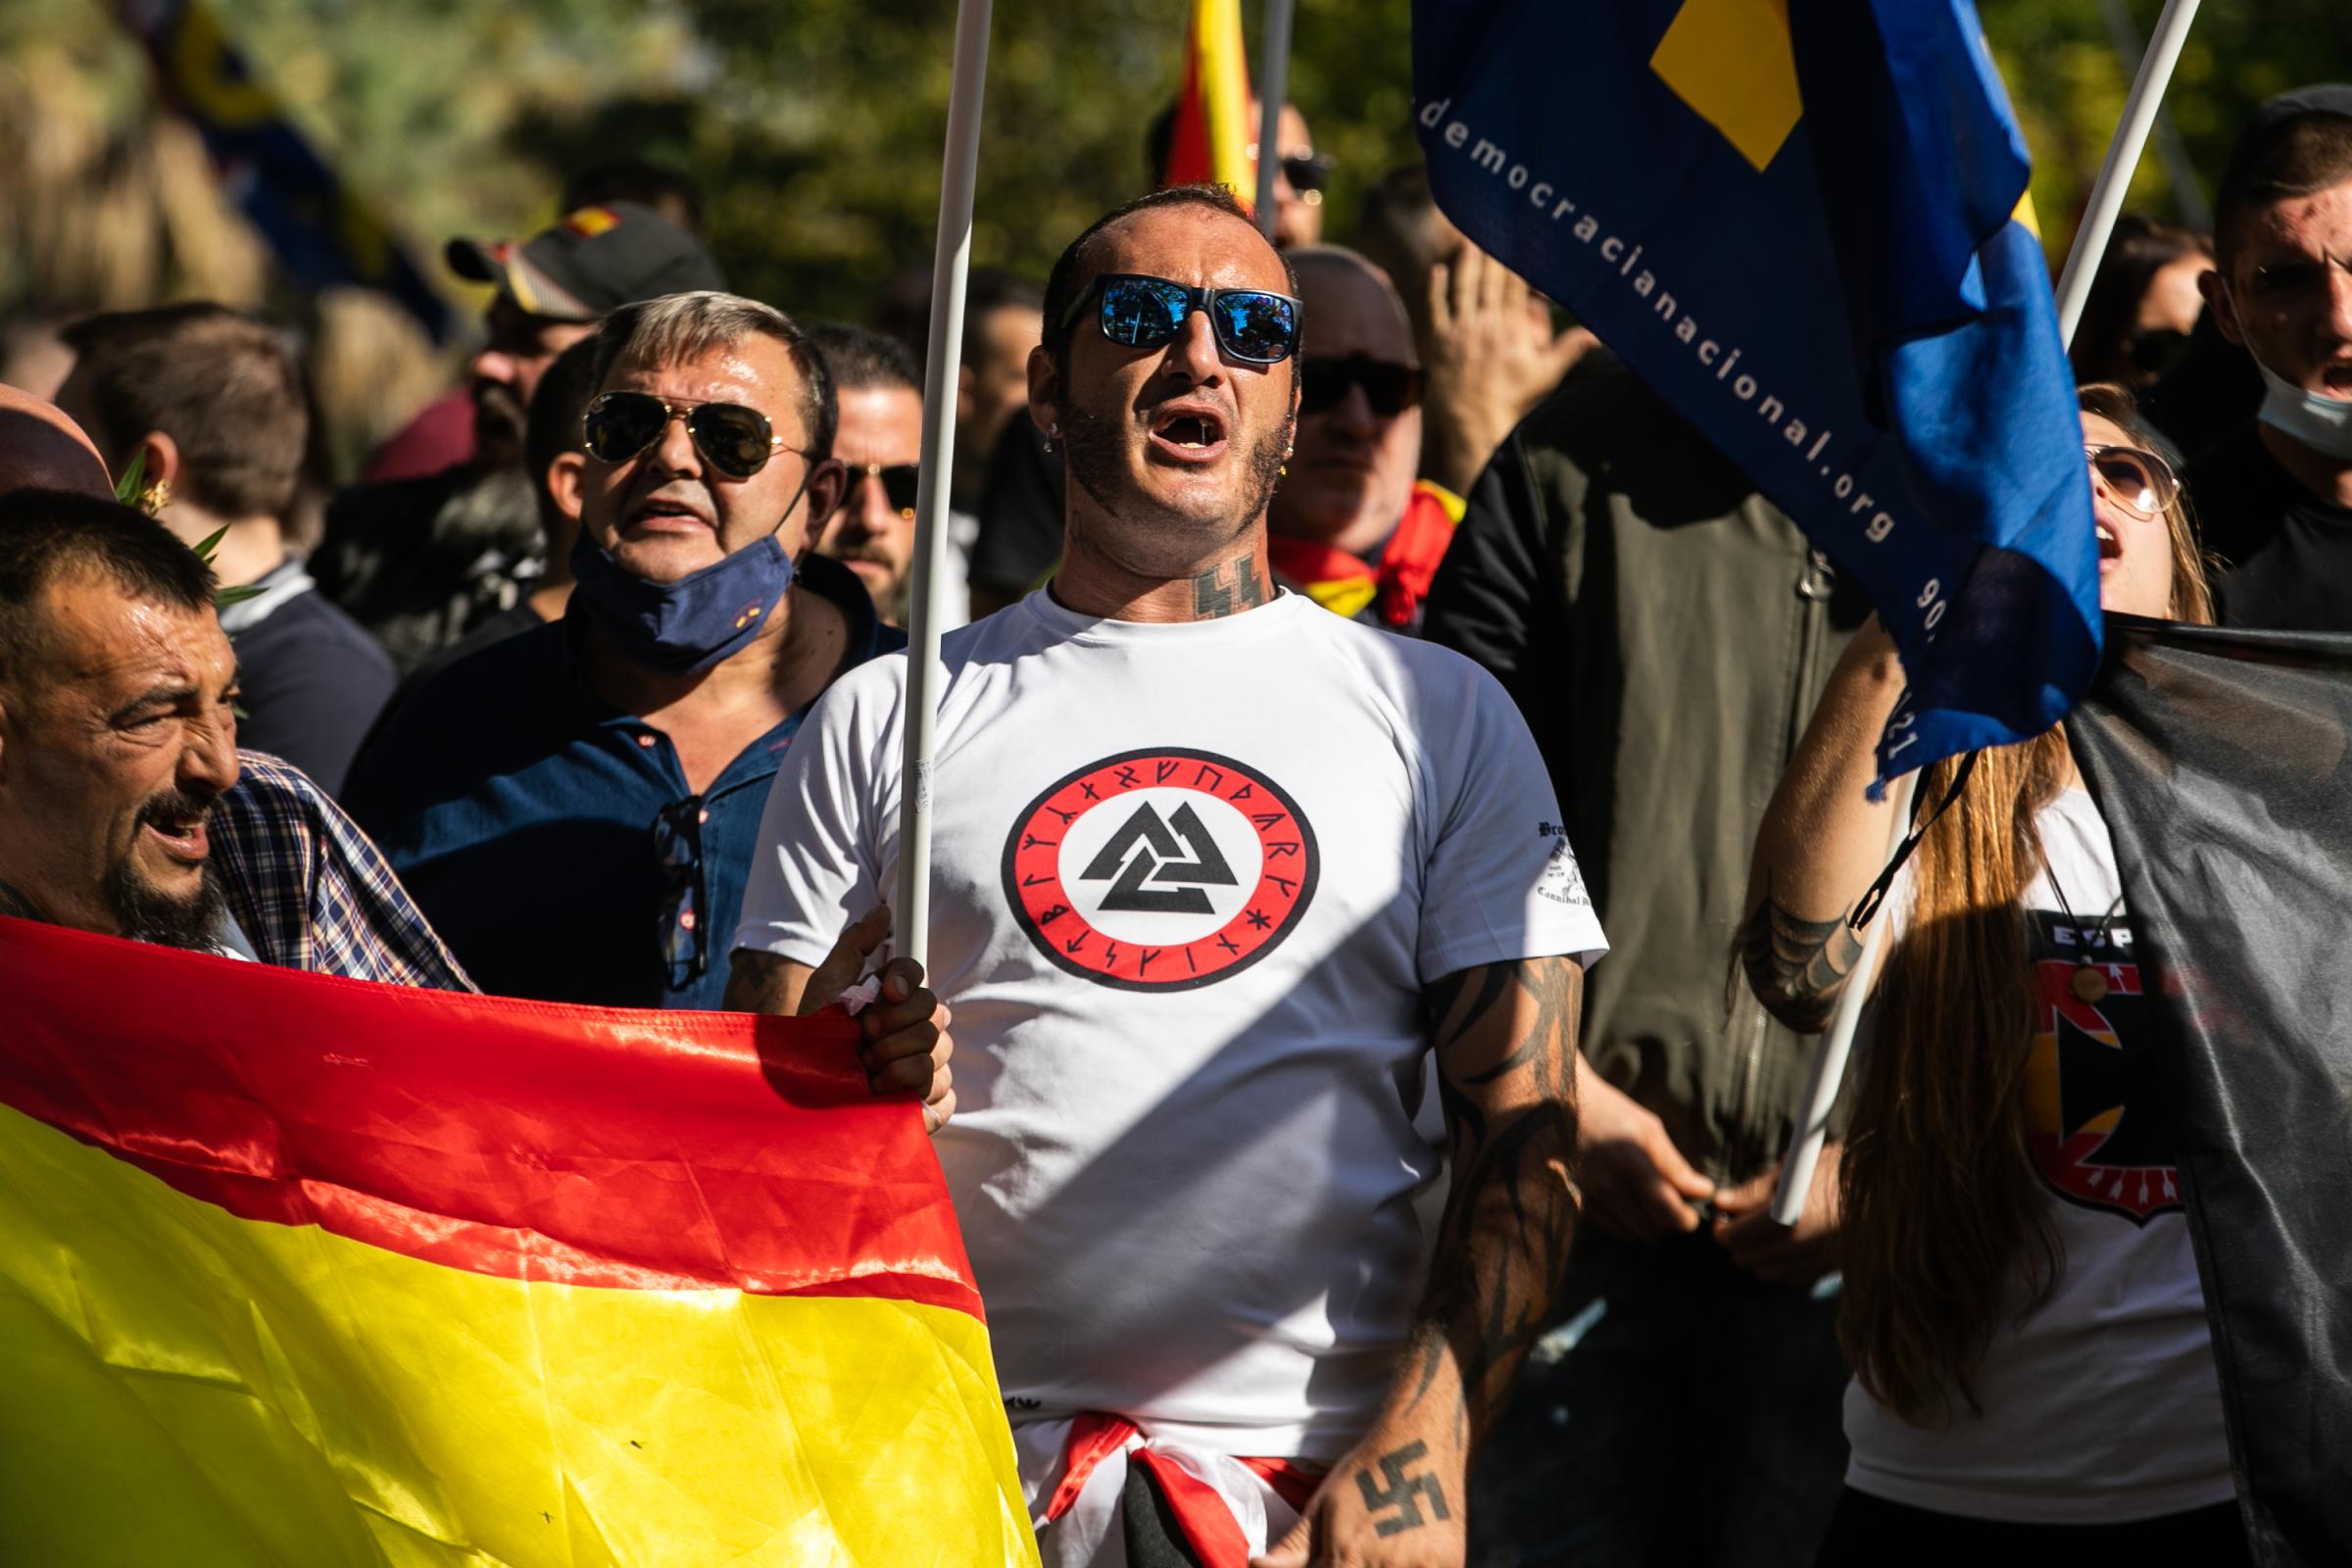 Spain's National Day Overshadowed By Colonialist Past  - BARCELONA, SPAIN - OCTOBER 12: A man with tattooed Nazi...